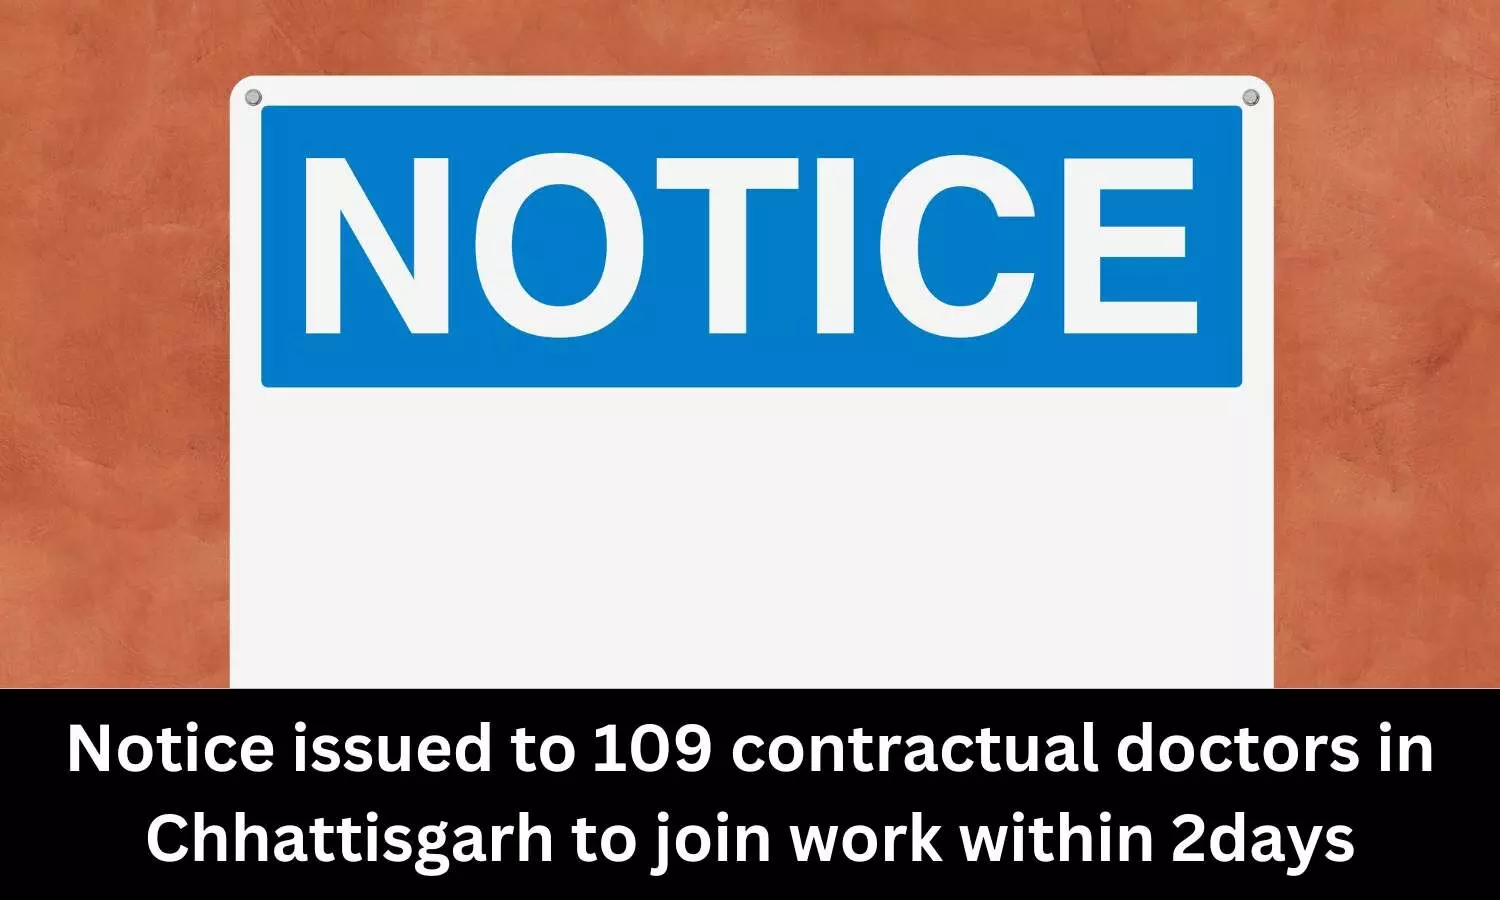 Notice issued to 109 contractual doctors in Chhattisgarh to join work within 2days